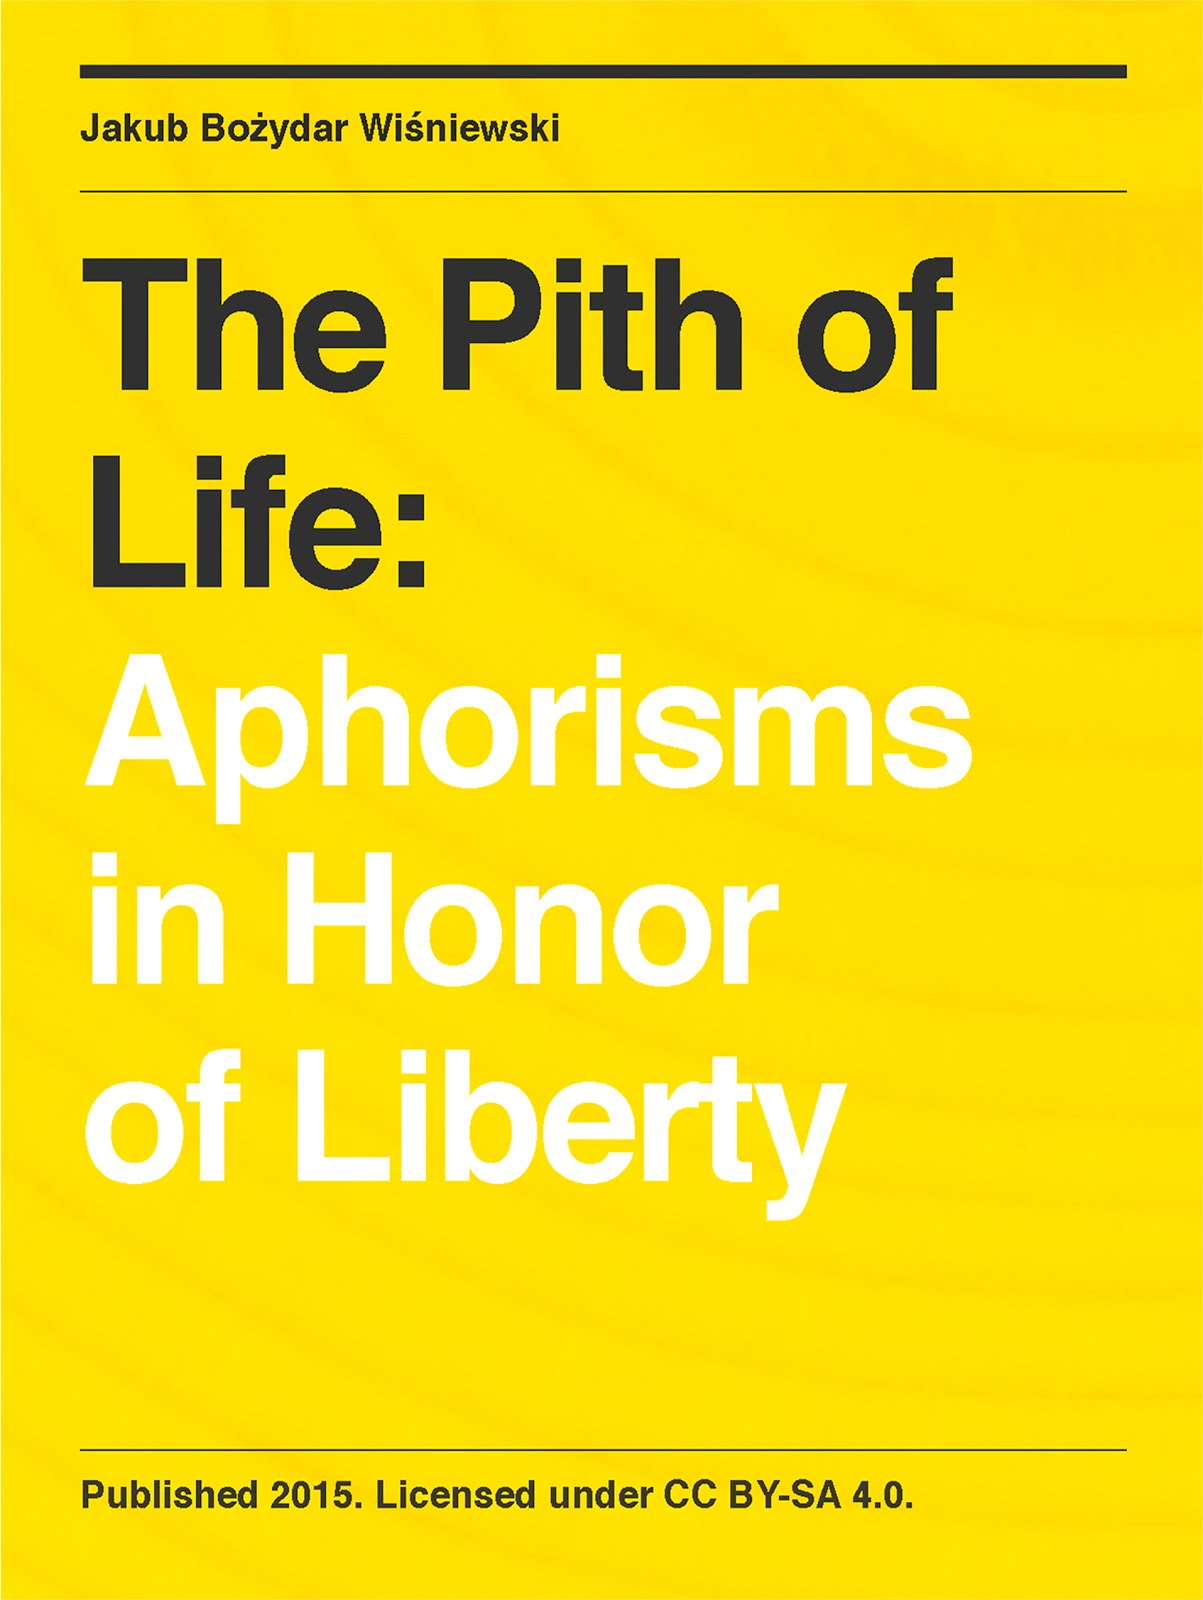 Aphorisms in Honor of Liberty